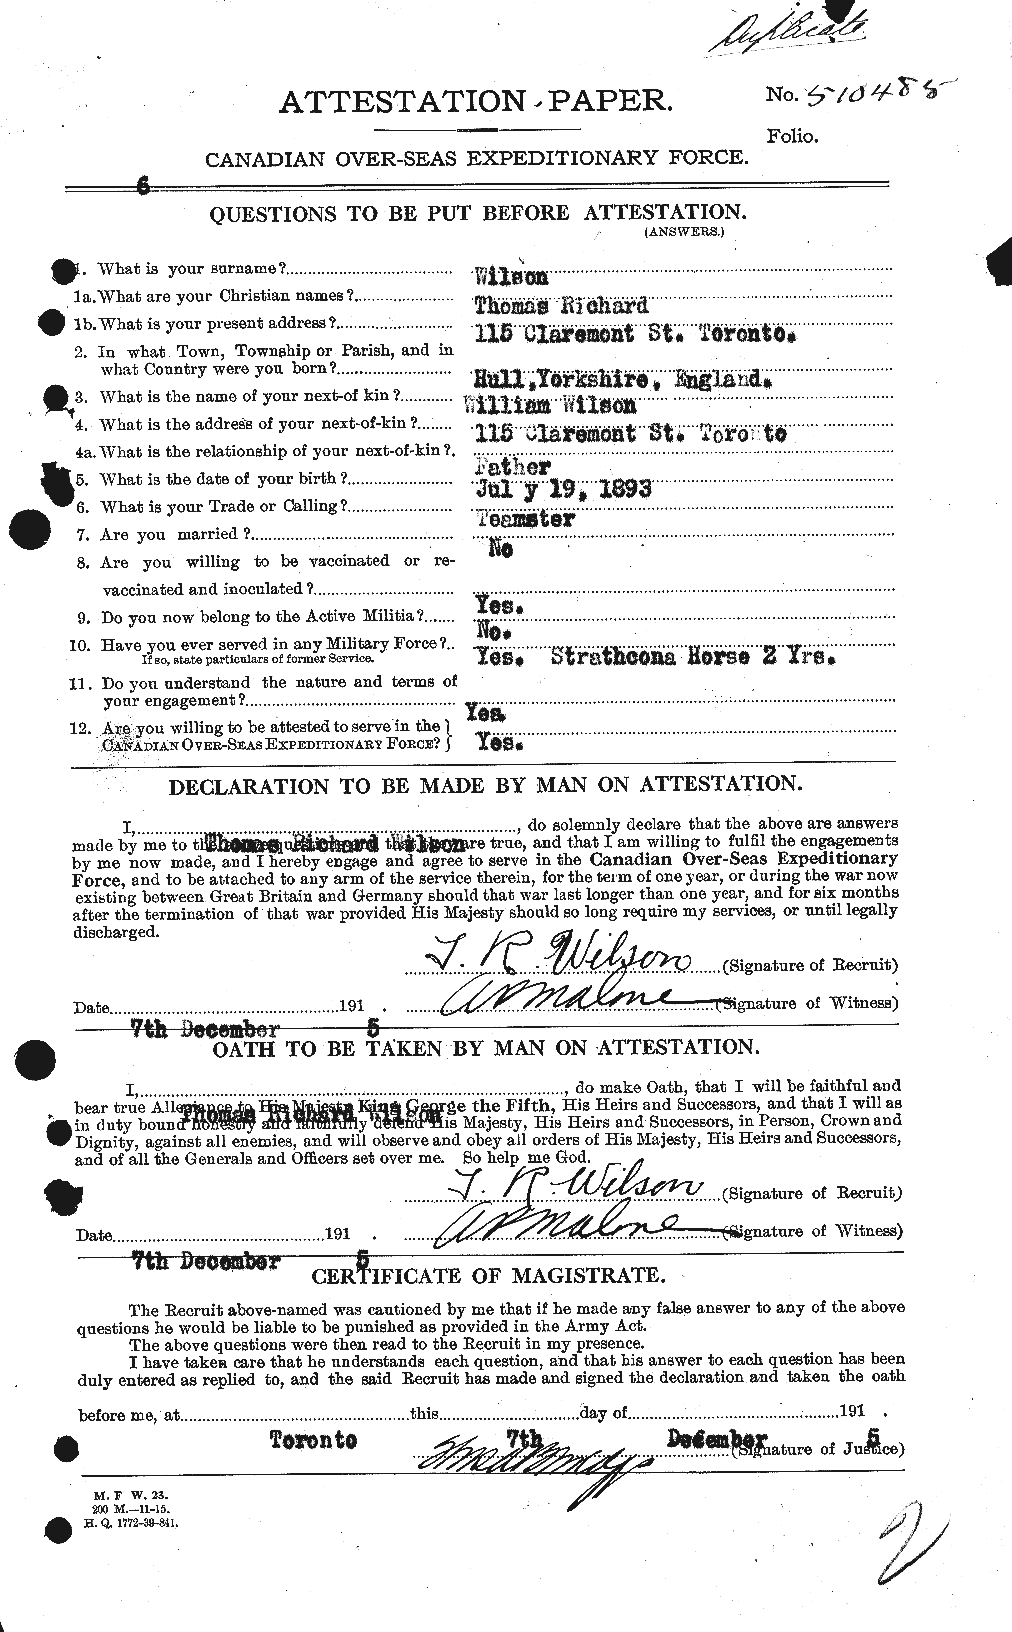 Personnel Records of the First World War - CEF 681292a